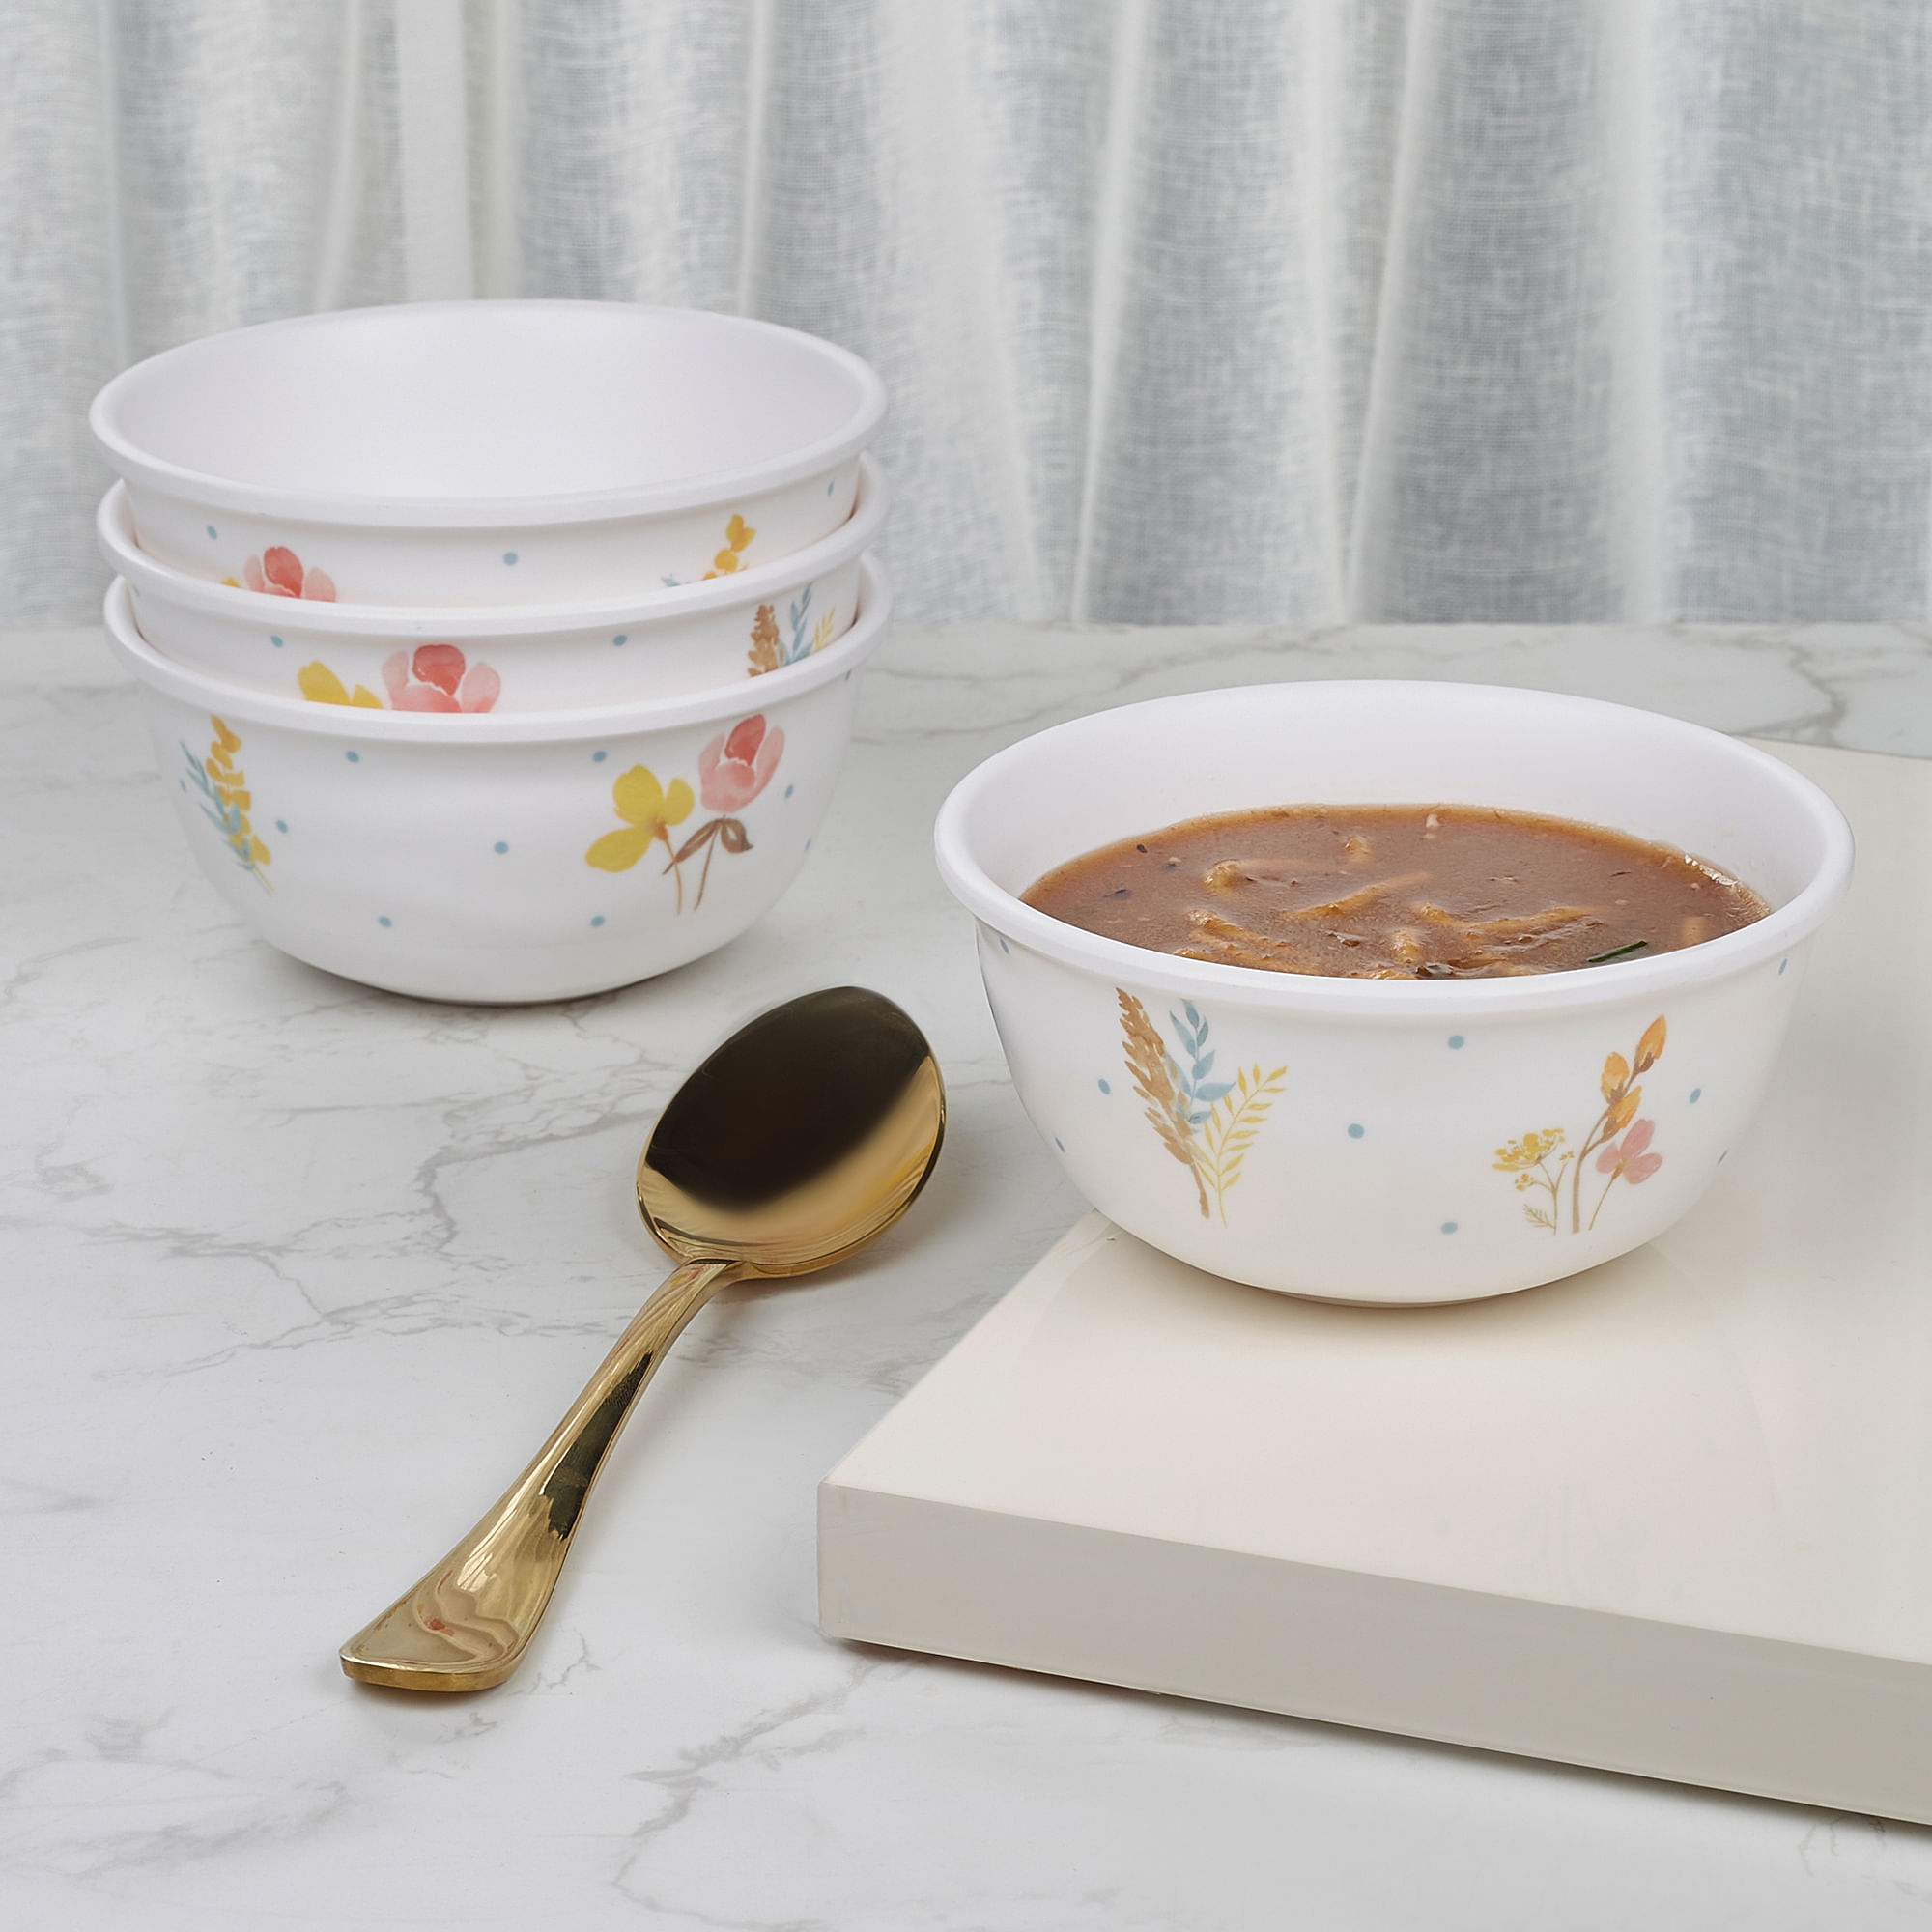 Buy Gypsy Melamine Soup Bowl Set of 4 in Multi Colour Online at